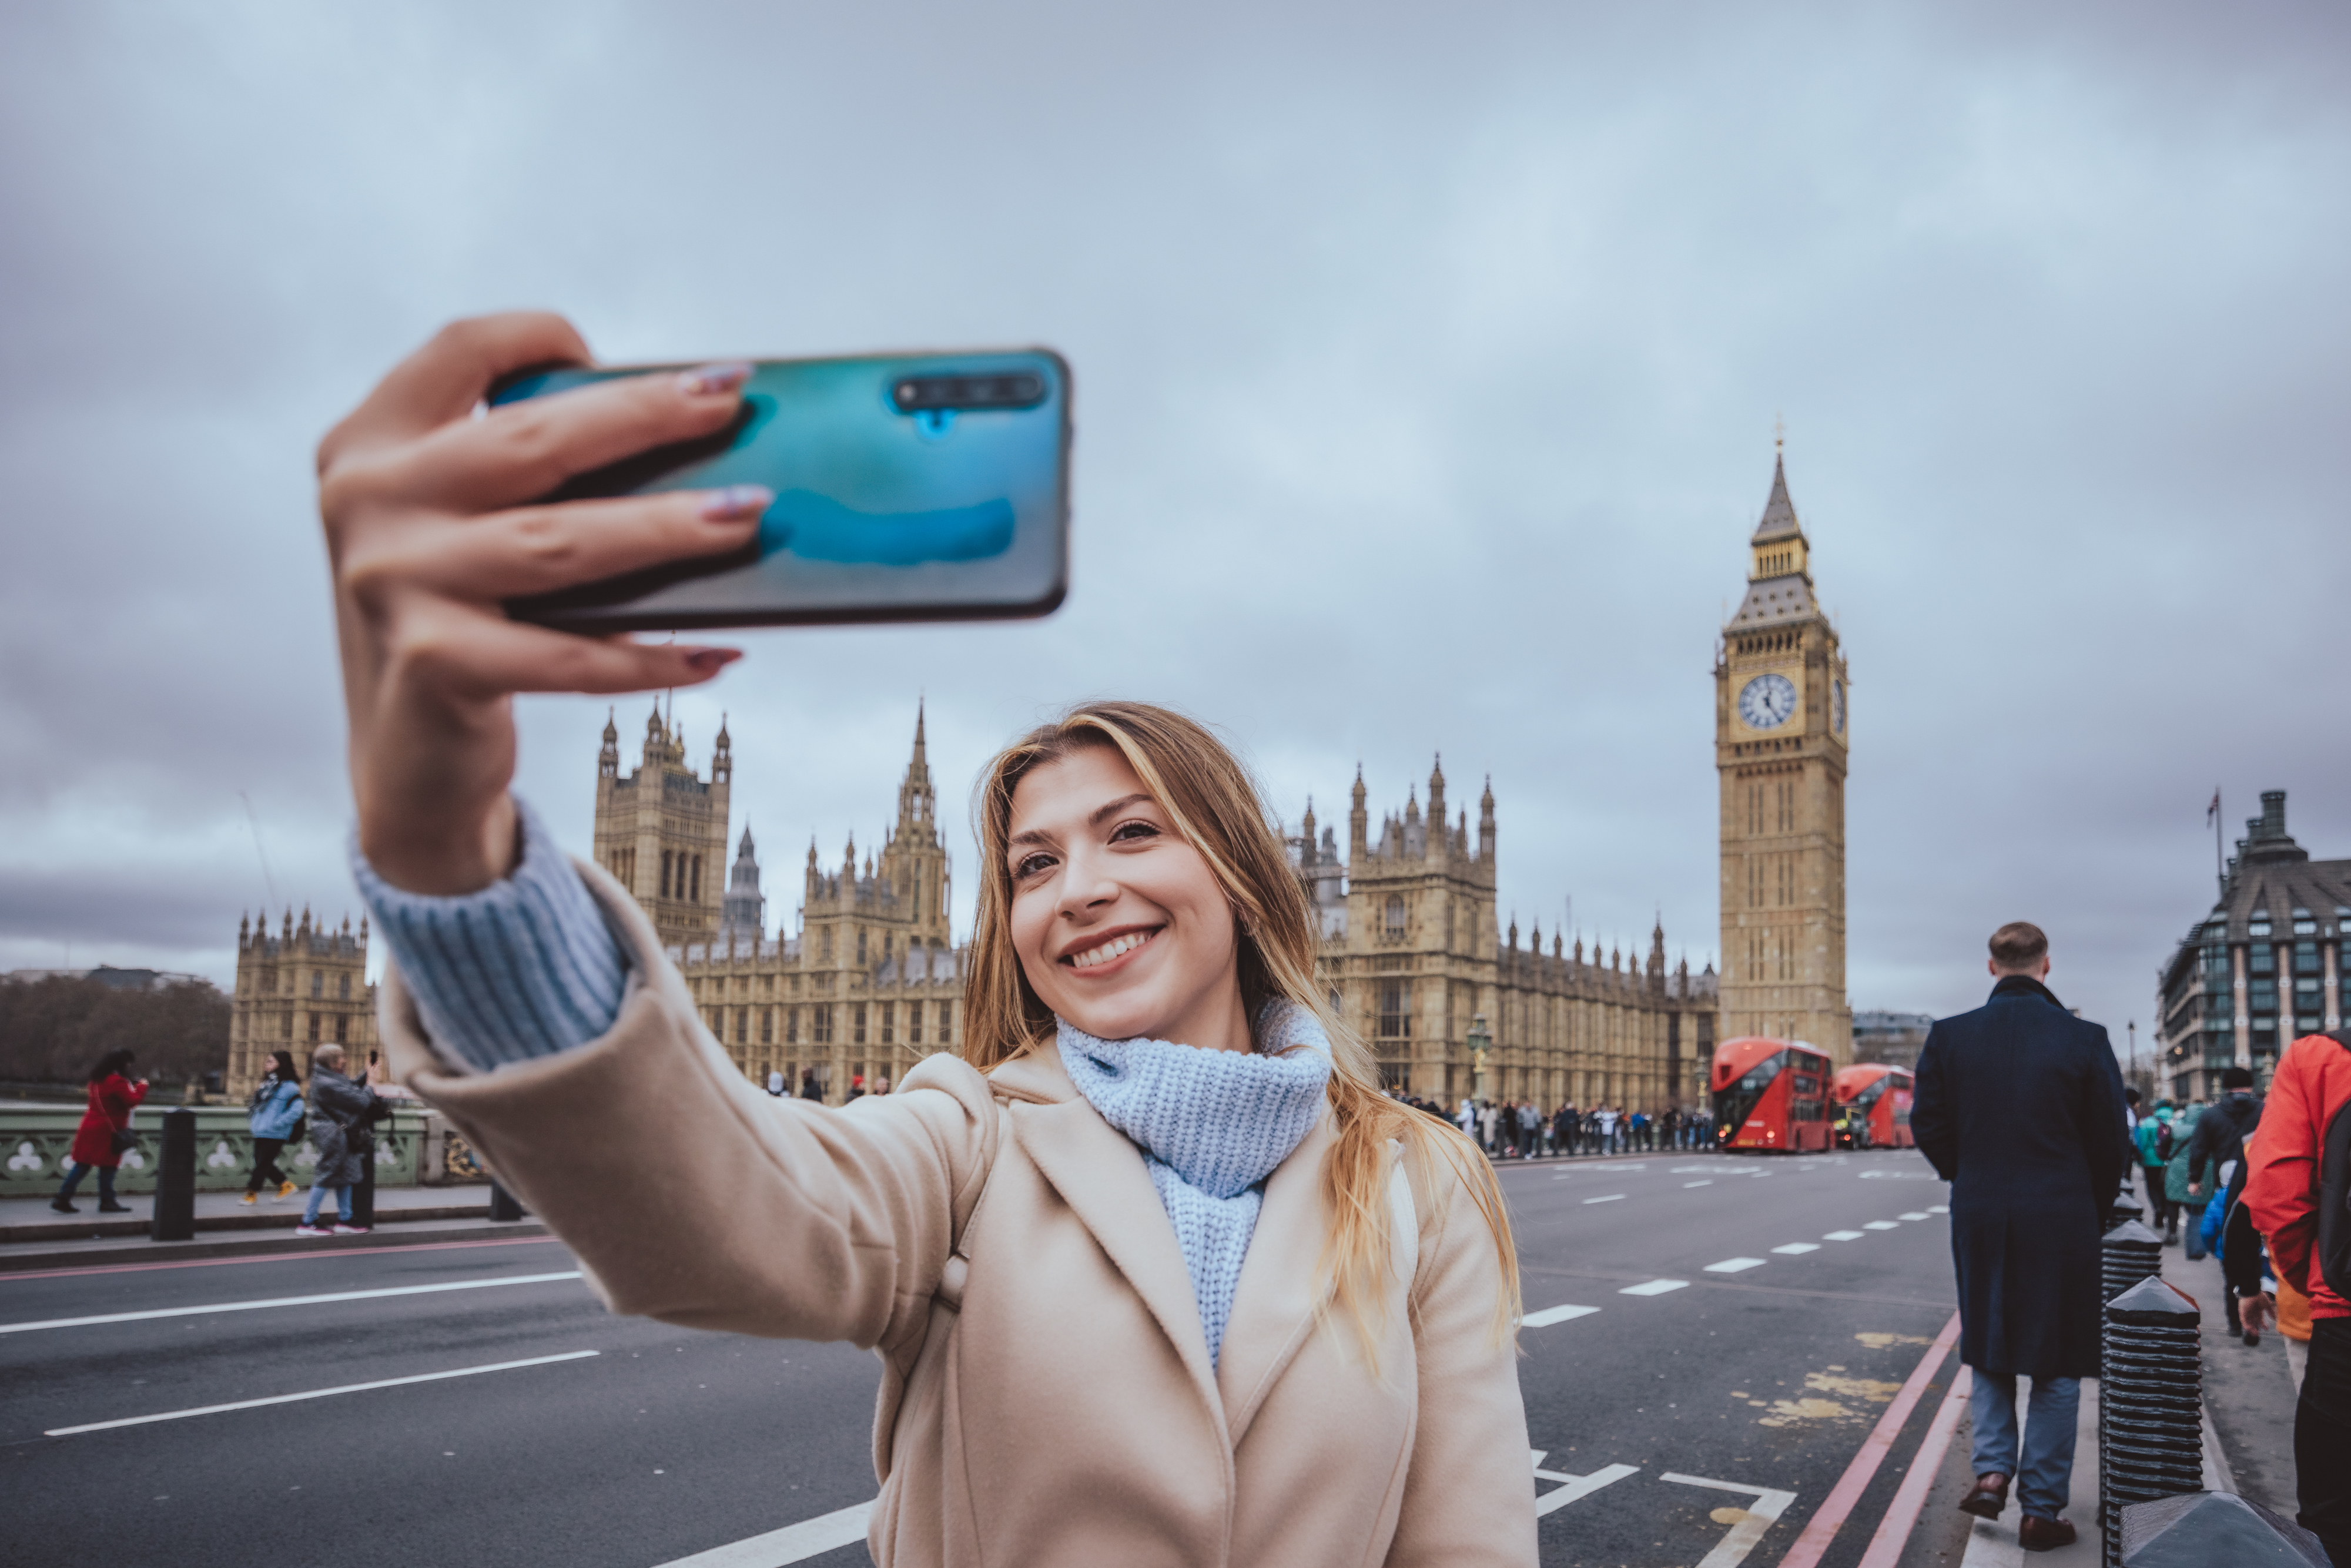 Woman takes a selfie with Big Ben and the UK Parliament in the background